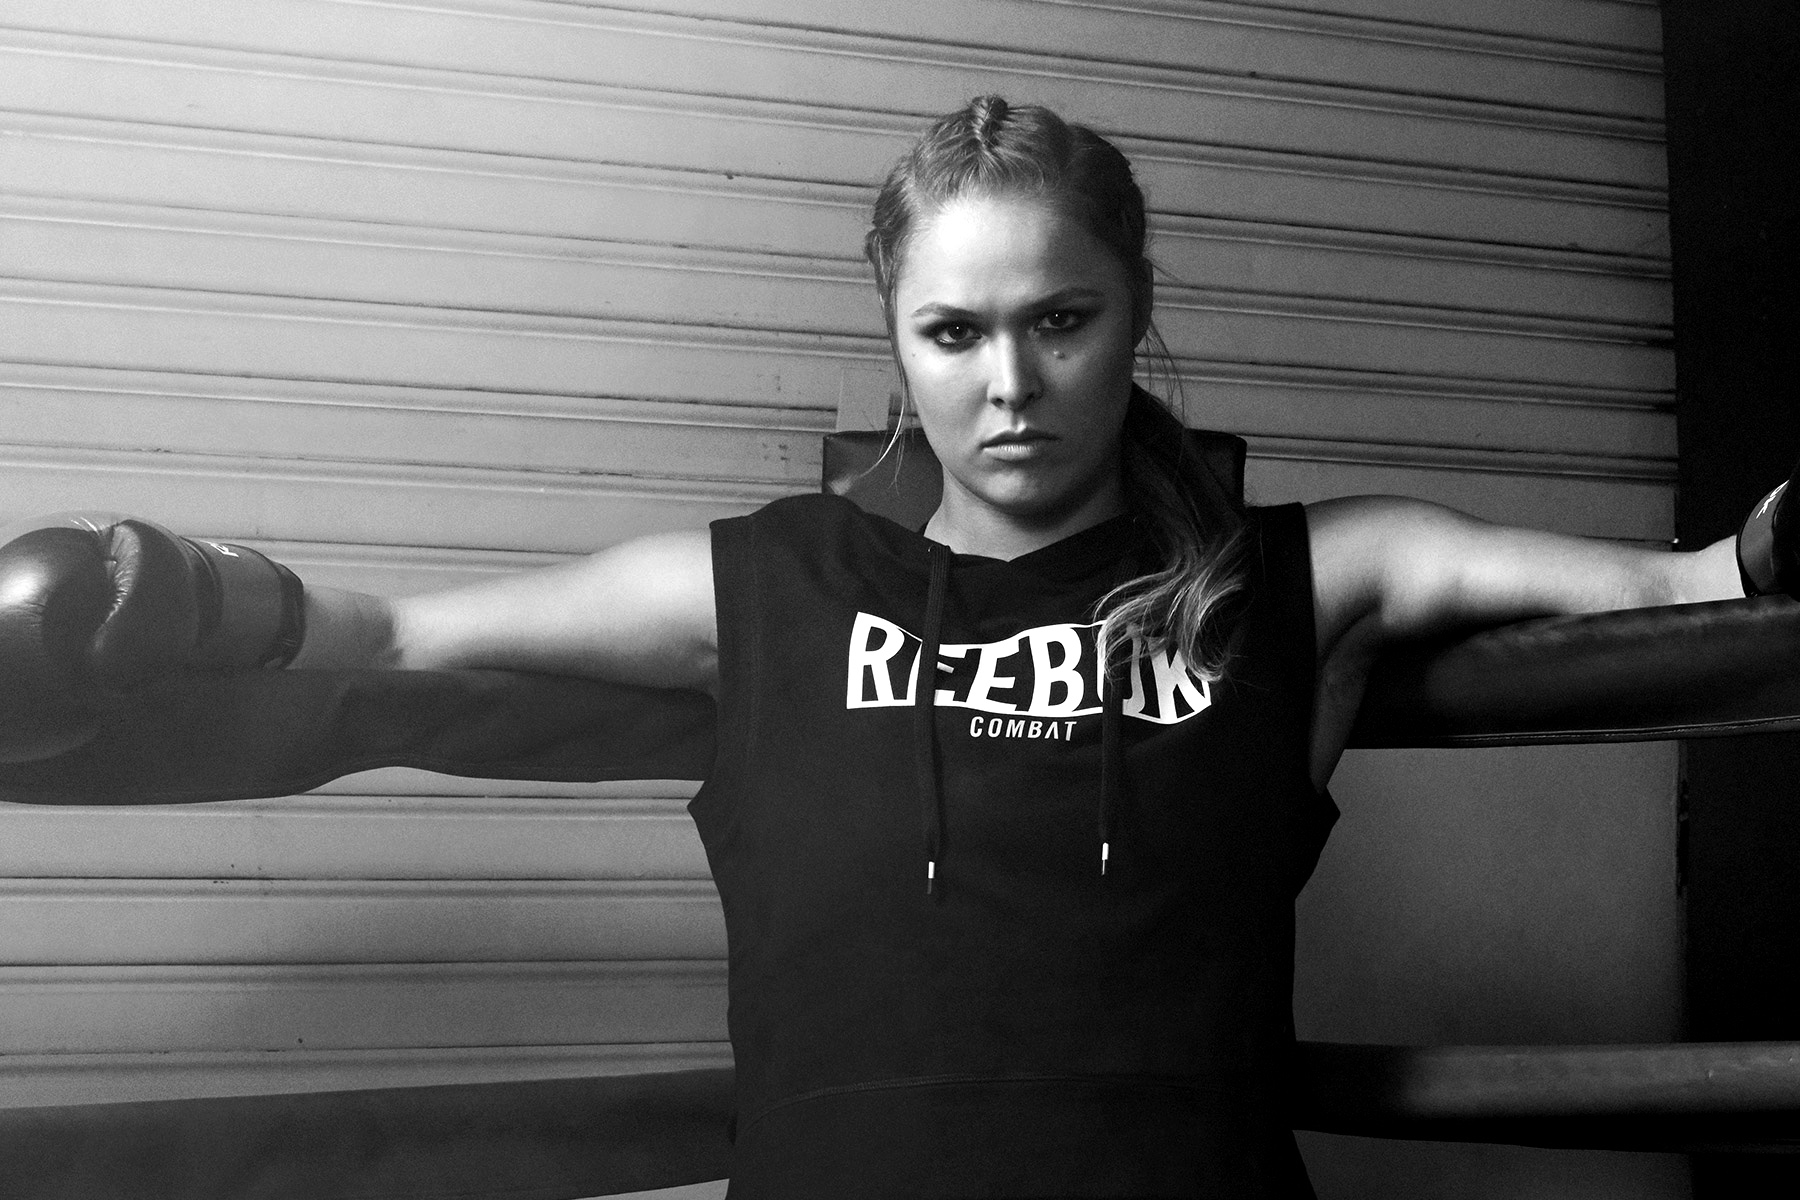 Female MMA fighter, Ronda Rousey, photographed by Scott Council